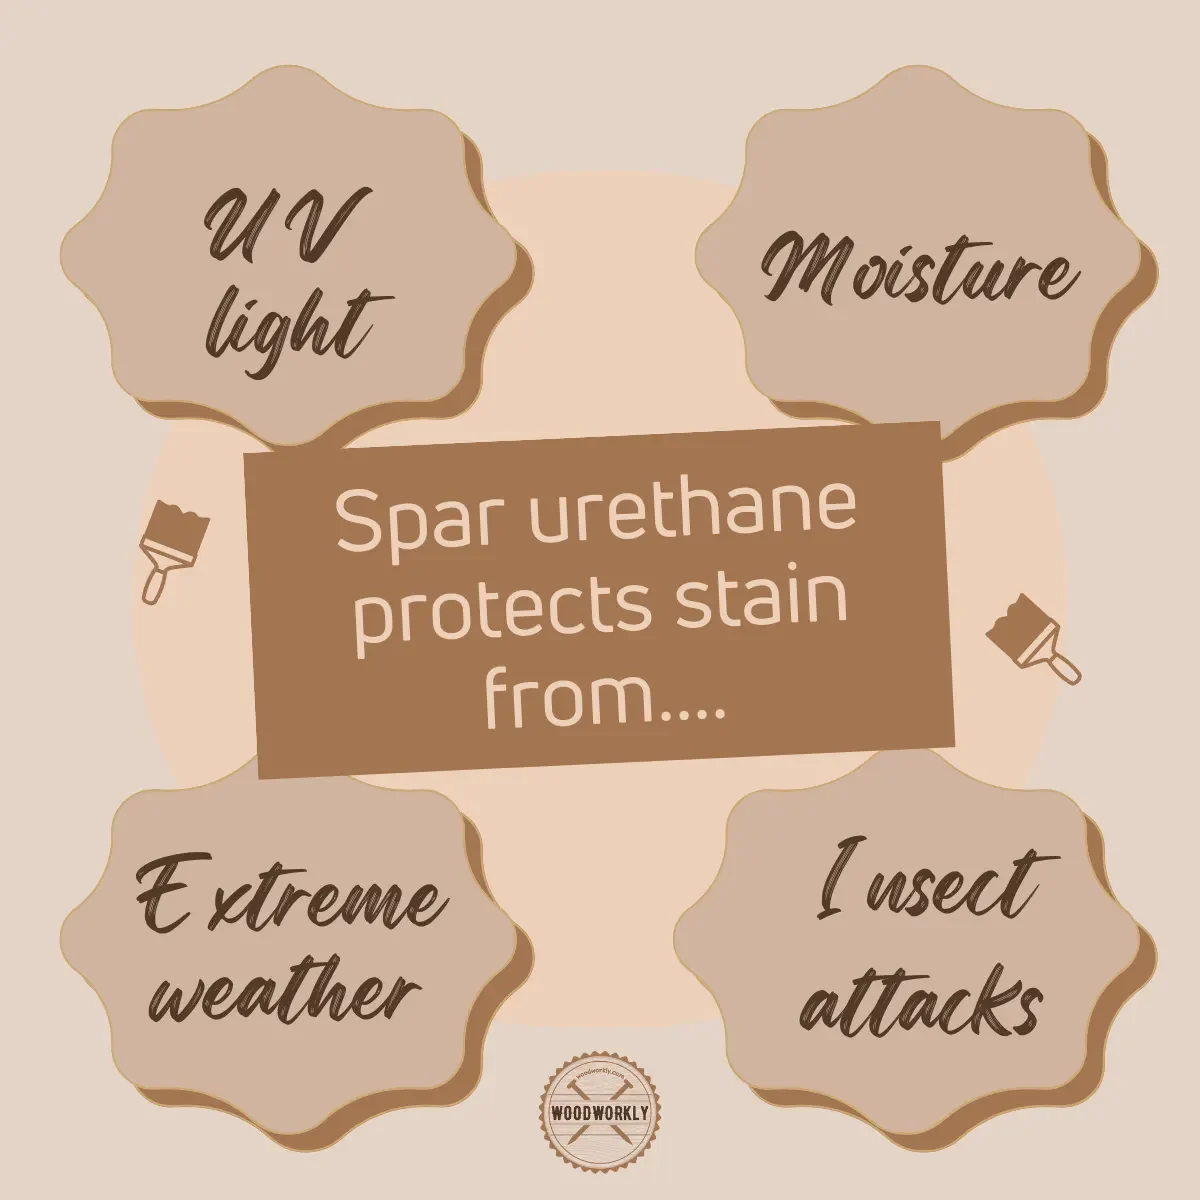 Spar urethane protects stain from moisture, uv, insect attacks